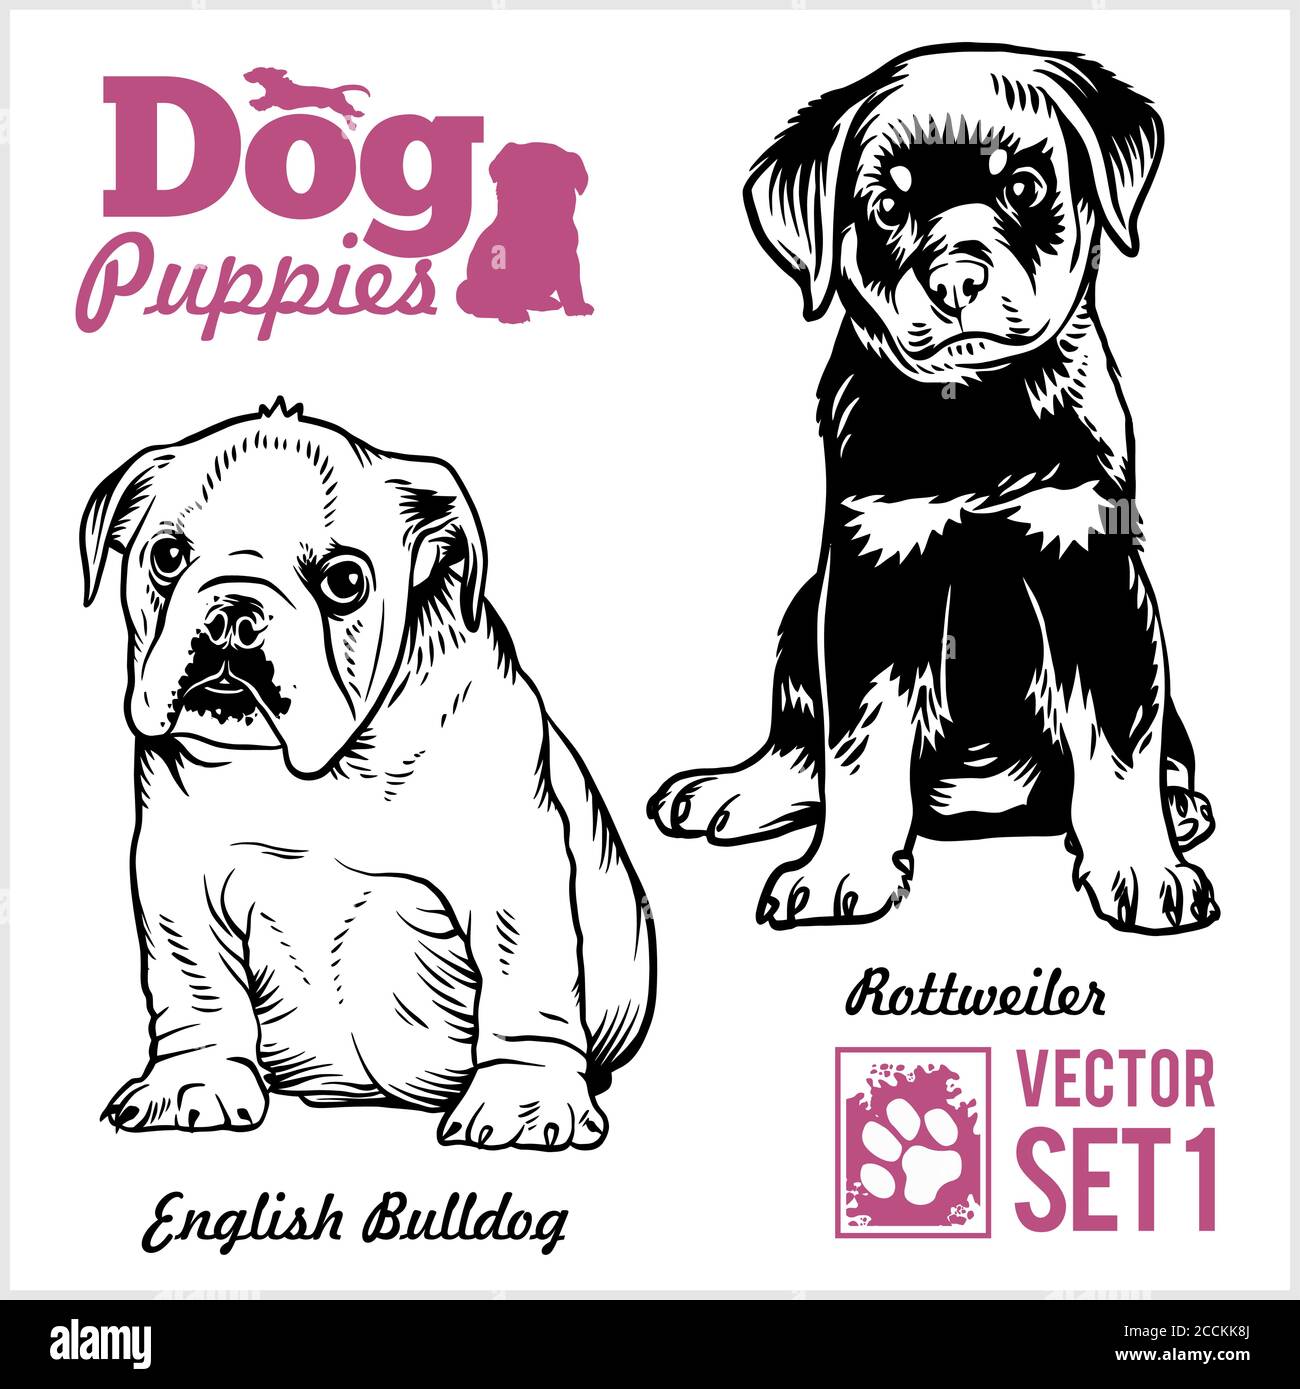 English Bulldog and Rottweiler - Dog Puppies. Vector set. Funny dogs puppy pet characters different breads doggy illustration isolated on white. Stock Vector